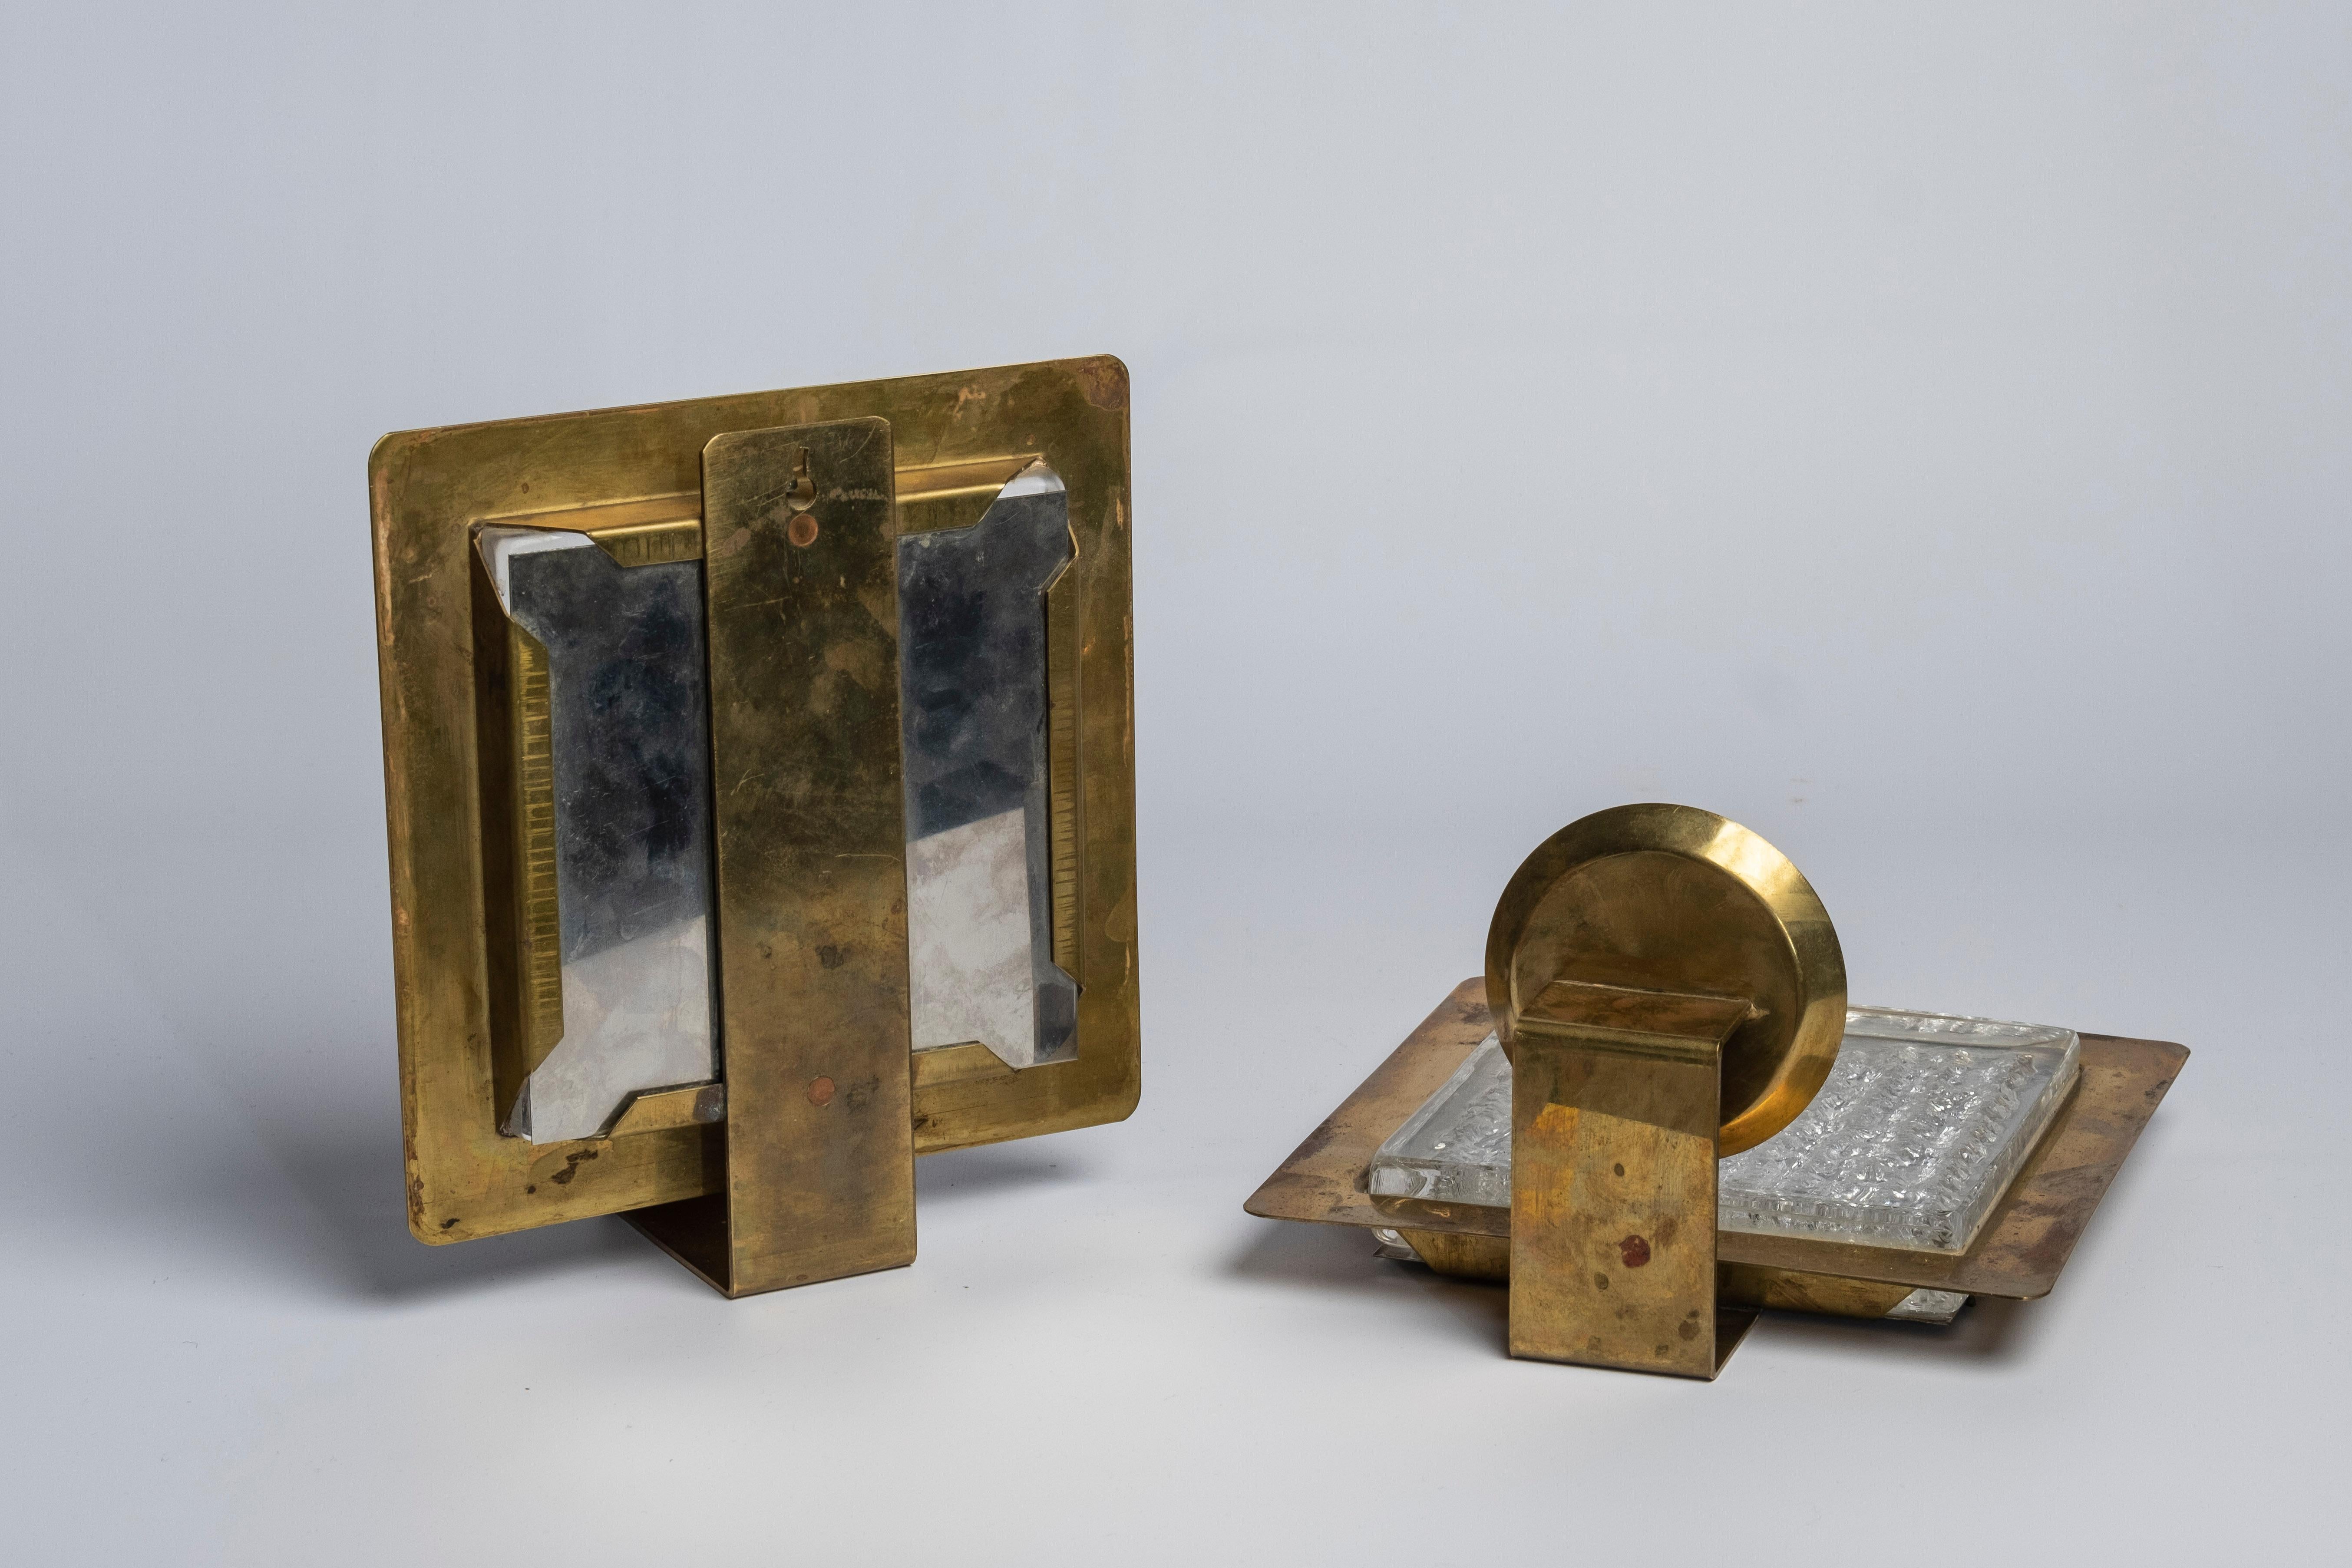 Pair of brass and glass wall-mounted candle light holders fabricated by Høvik Lys, Norway 1950s. Beautifully patinated brass.